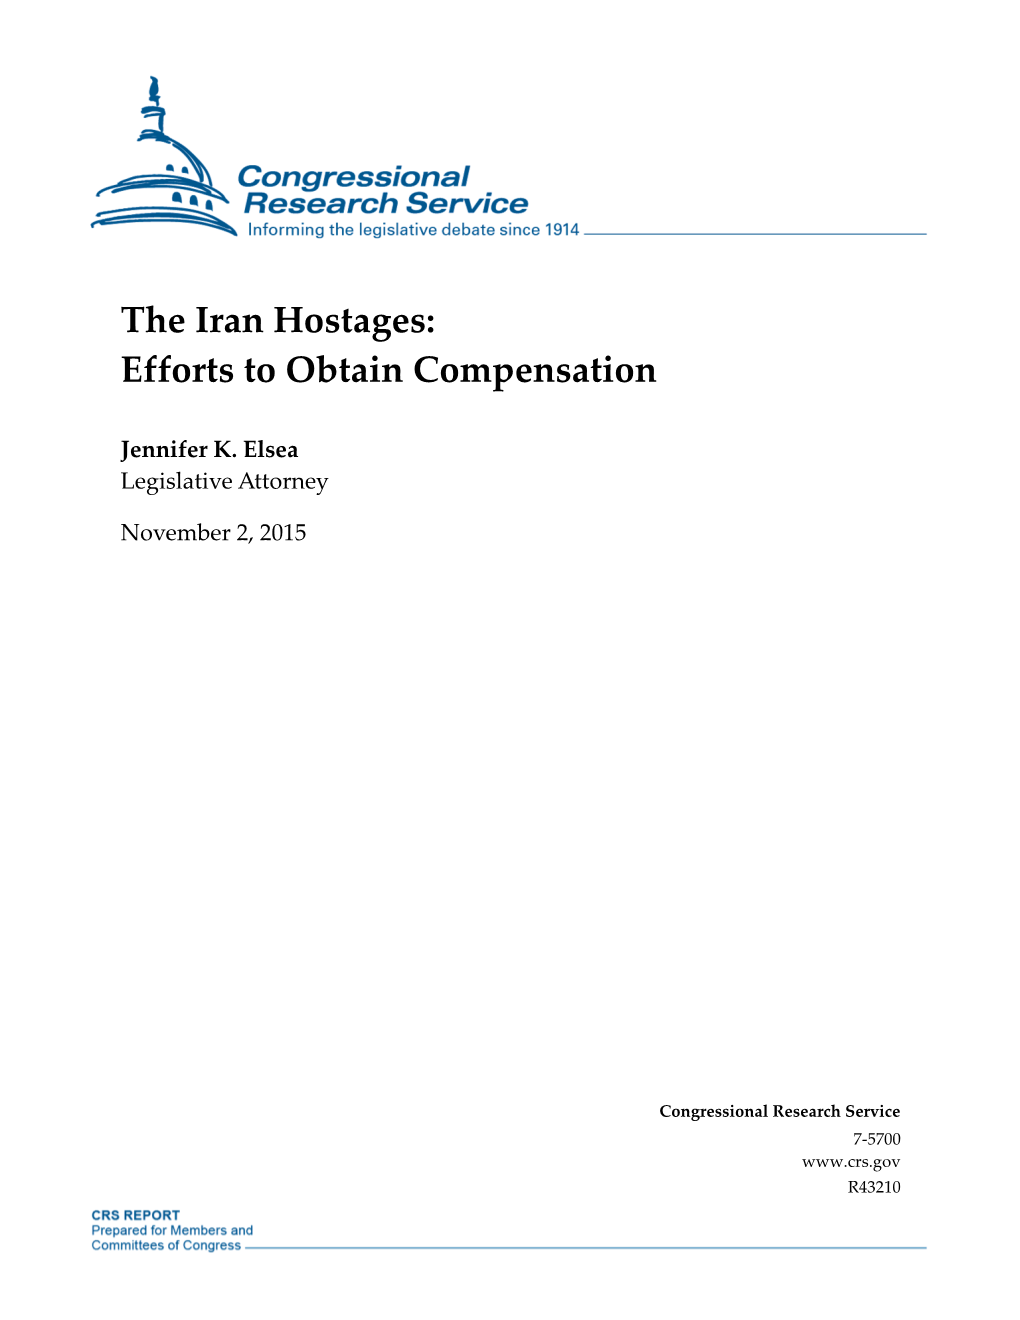 The Iran Hostages: Efforts to Obtain Compensation